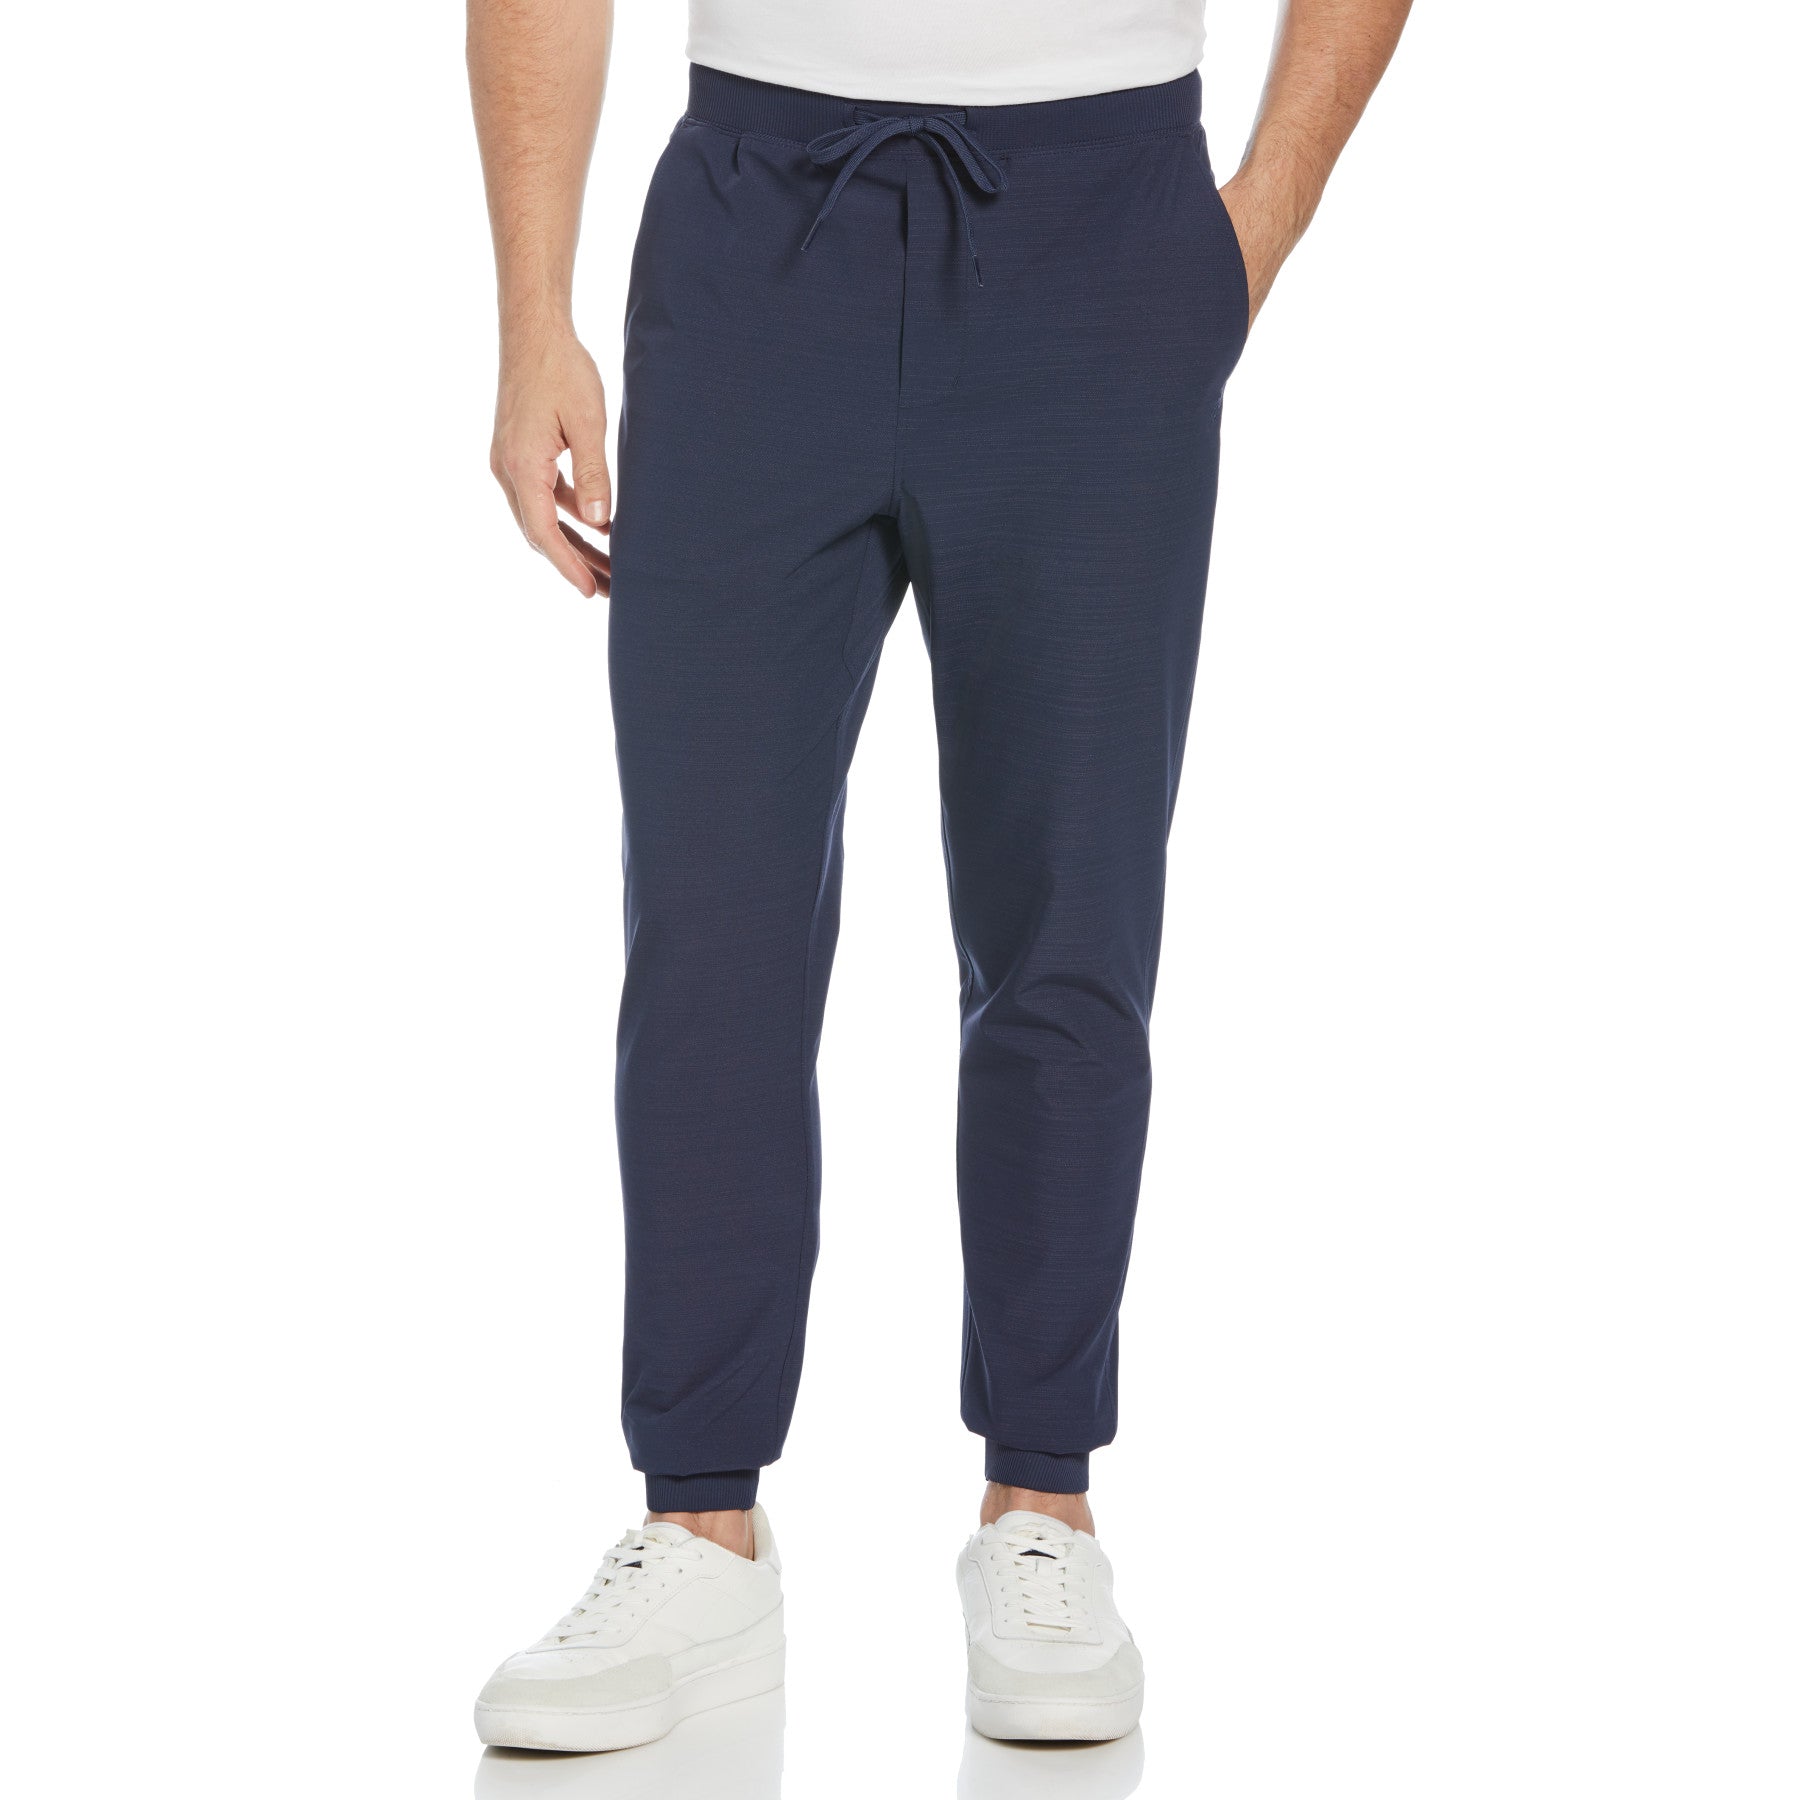 View Performance Crossover Trouser In Black Iris information